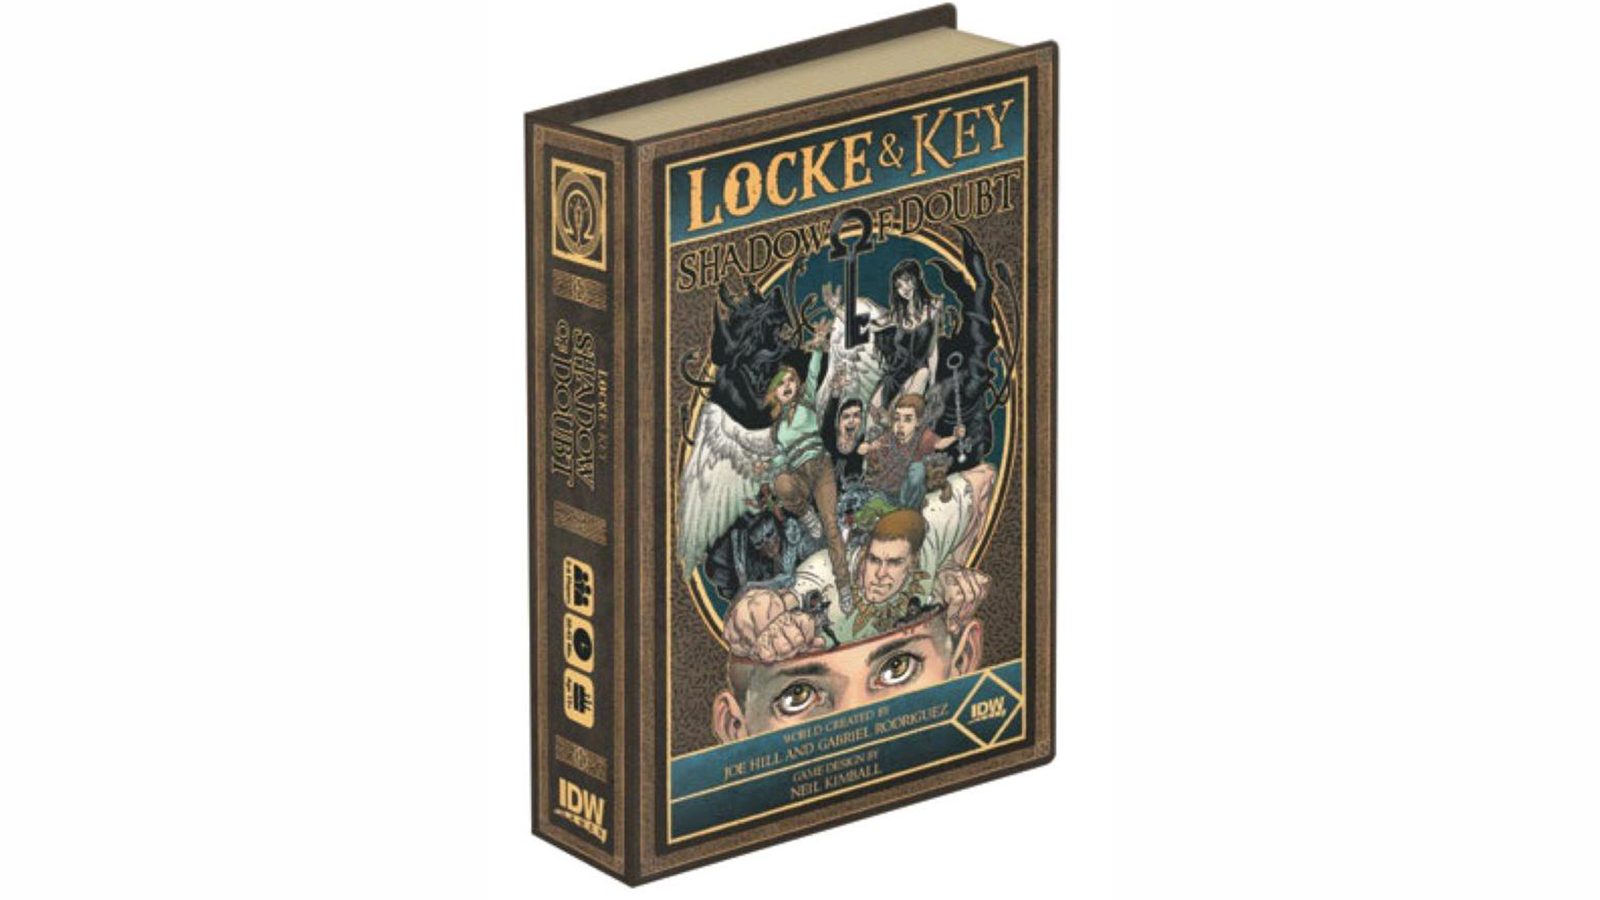 Locke & Key: Shadow of a Doubt is an upcoming card game based on the comic  book turned Netflix series